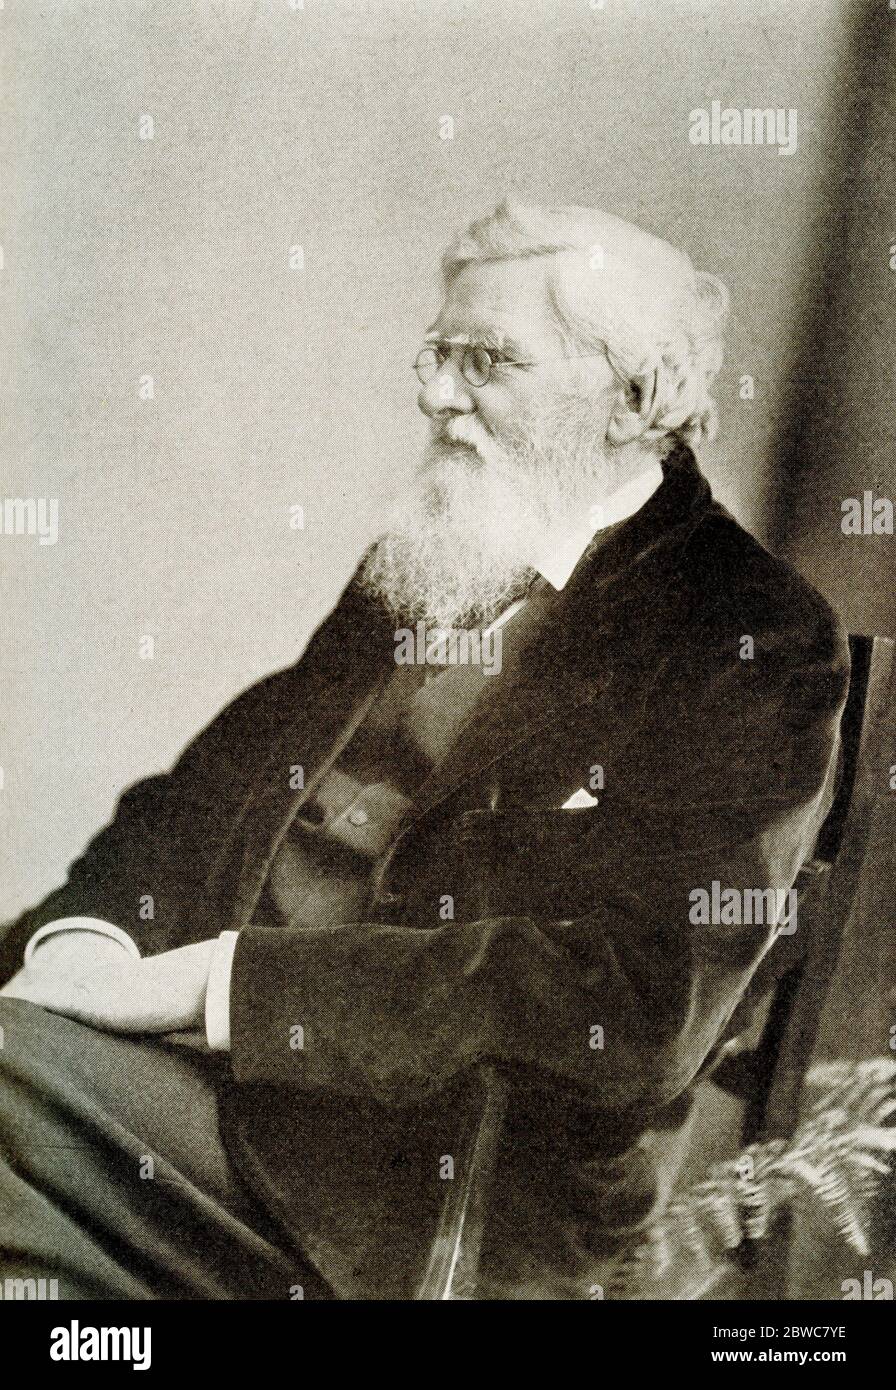 Alfred Russel Wallace (1823-1913) was a British naturalist, explorer, geographer, anthropologist, biologist and illustrator. He is best known for independently conceiving the theory of evolution through natural selection; his paper on the subject was jointly published with some of Charles Darwin's writings in 1858. Stock Photo